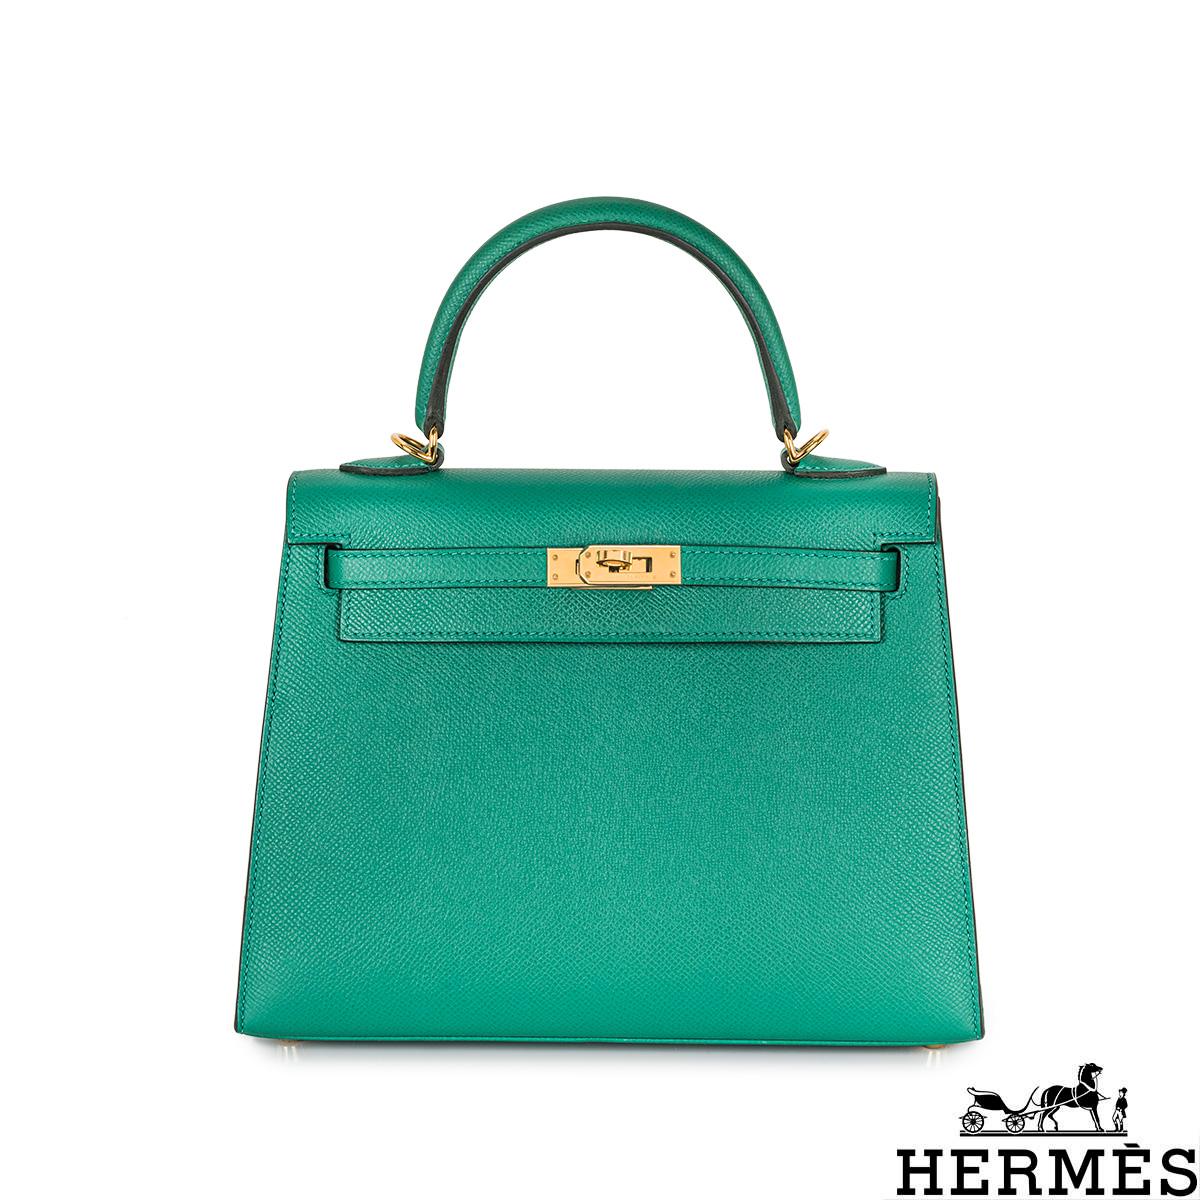 A gorgeous Hermès 25cm Kelly bag. The exterior of this Kelly features a Sellier style in Vert Verone Veau Epsom leather. The Vert Verone Epsom leather is complemented with gold-tone hardware and tonal stitchings. It features a front toggle closure